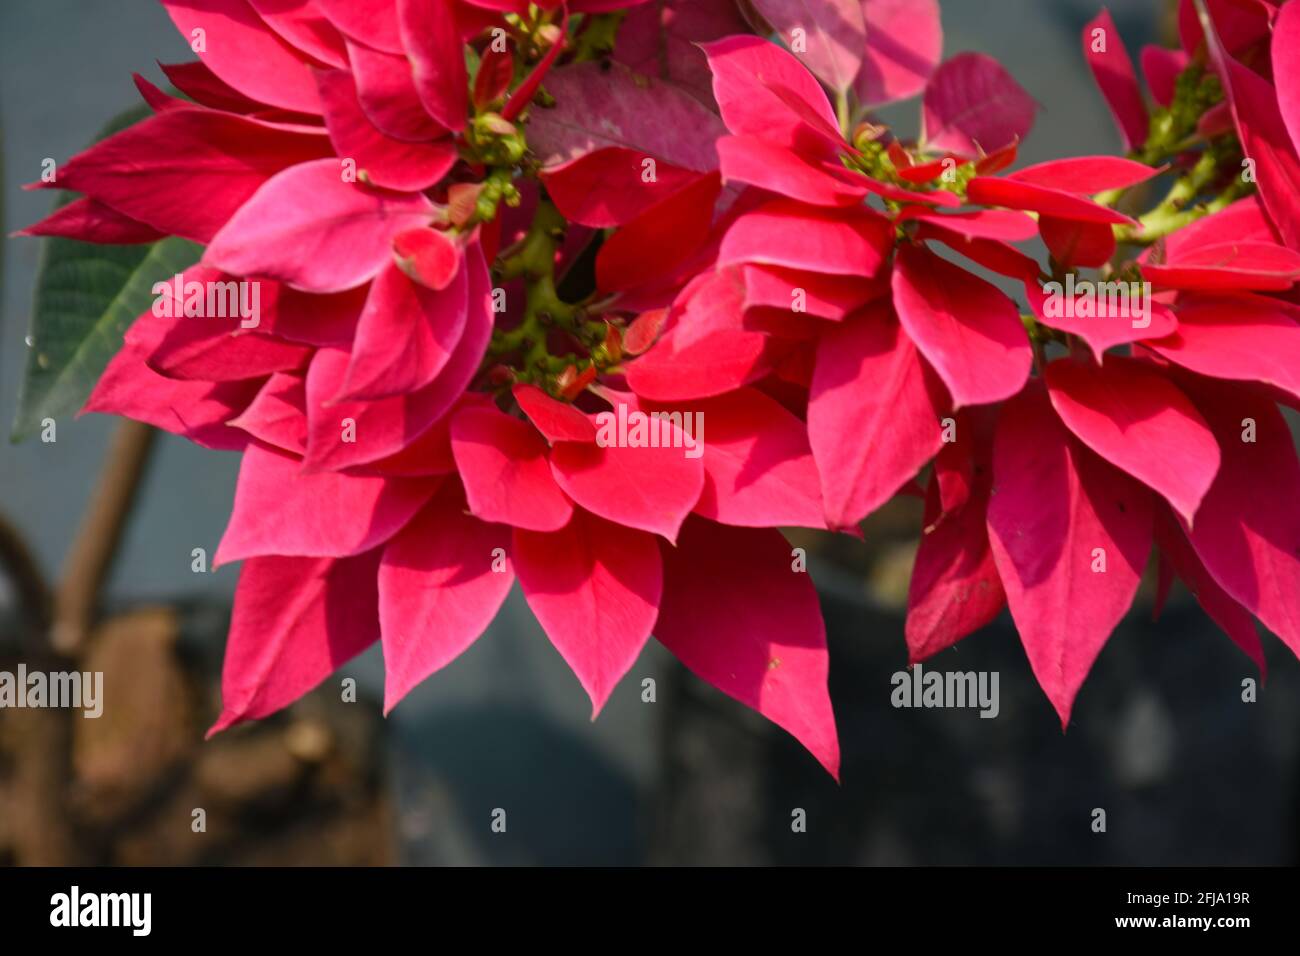 The red colour poinsettia potted house plant . Stock Photo